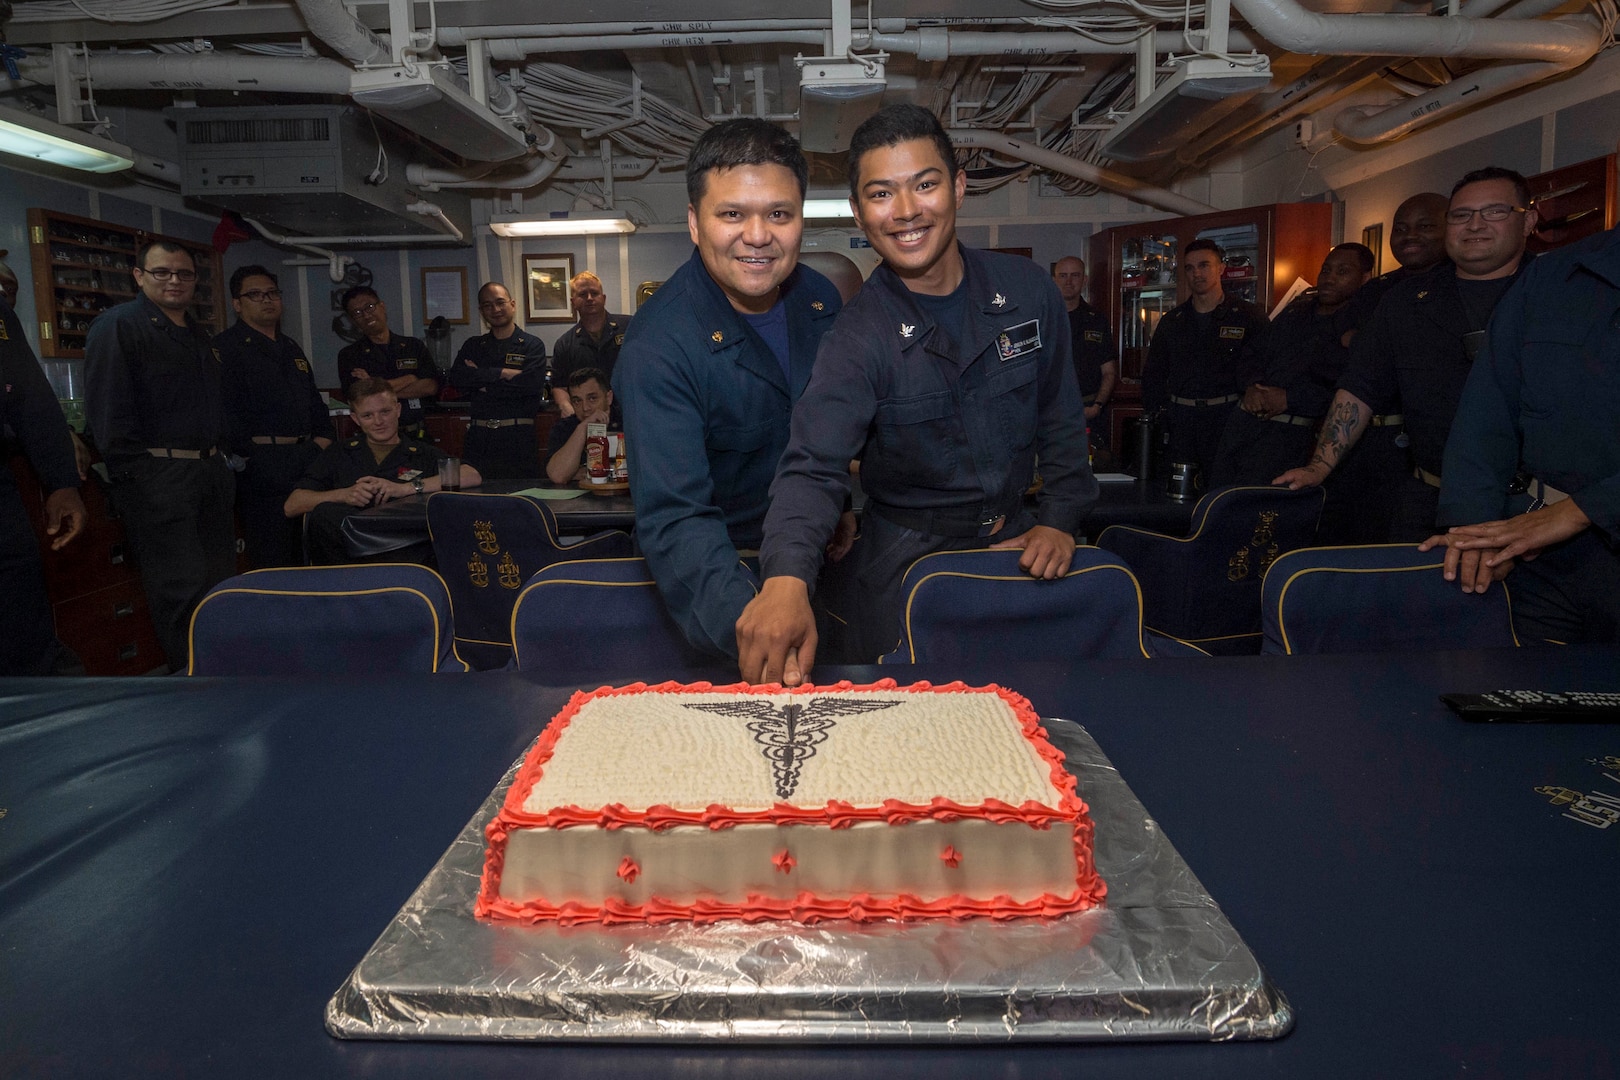 Chief Hospital Corpsman Mark Naluz, from Nashville, Tennessee, and Hospital Corpsman 3rd Class Jenson Yalunggonzales, from Long Beach, California, cut a cake in the Chief Mess on the Ticonderoga-class guided-missile cruiser USS Chancellorsville (CG 62) during a celebration for the Hospital Corpsmen's 120th birthday. The Hospital Corps was officially created on June 17th, 1898, but hospital corpsmen have been serving the U.S. Navy for over 200 years. Chancellorsville is forward-deployed to the U.S. 7th Fleet area of operations in support of security and stability in the Indo-Pacific region.